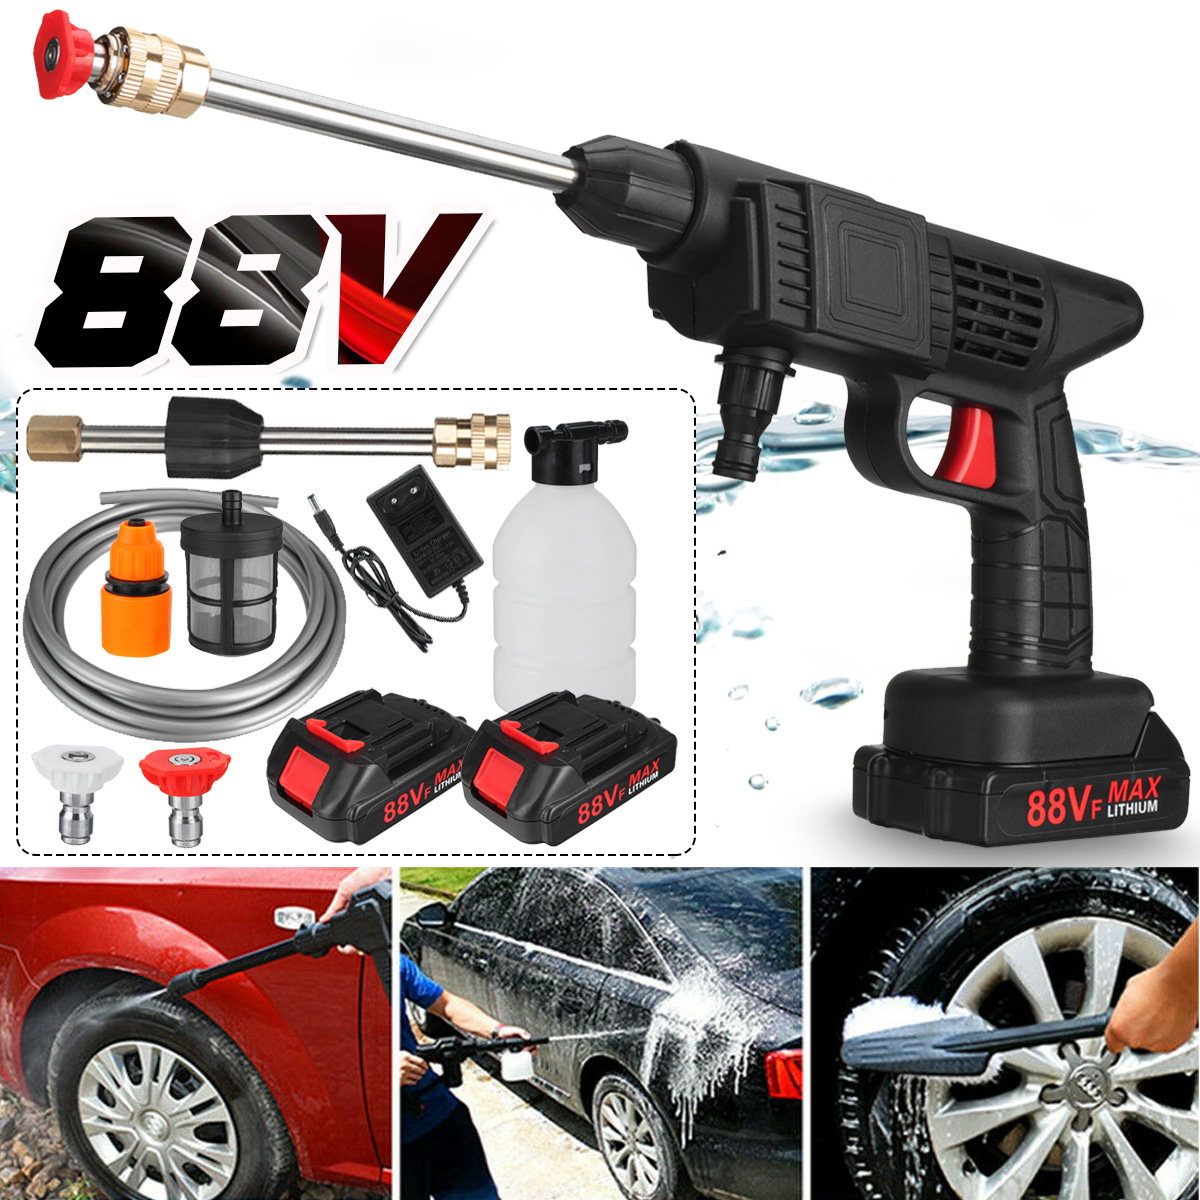 88VF-High-Pressure-Cordless-Washer-Spray-Guns-Water-Guns-Cleaner-With-None-1pc-2Pcs-88VF-Battery-1873694-2